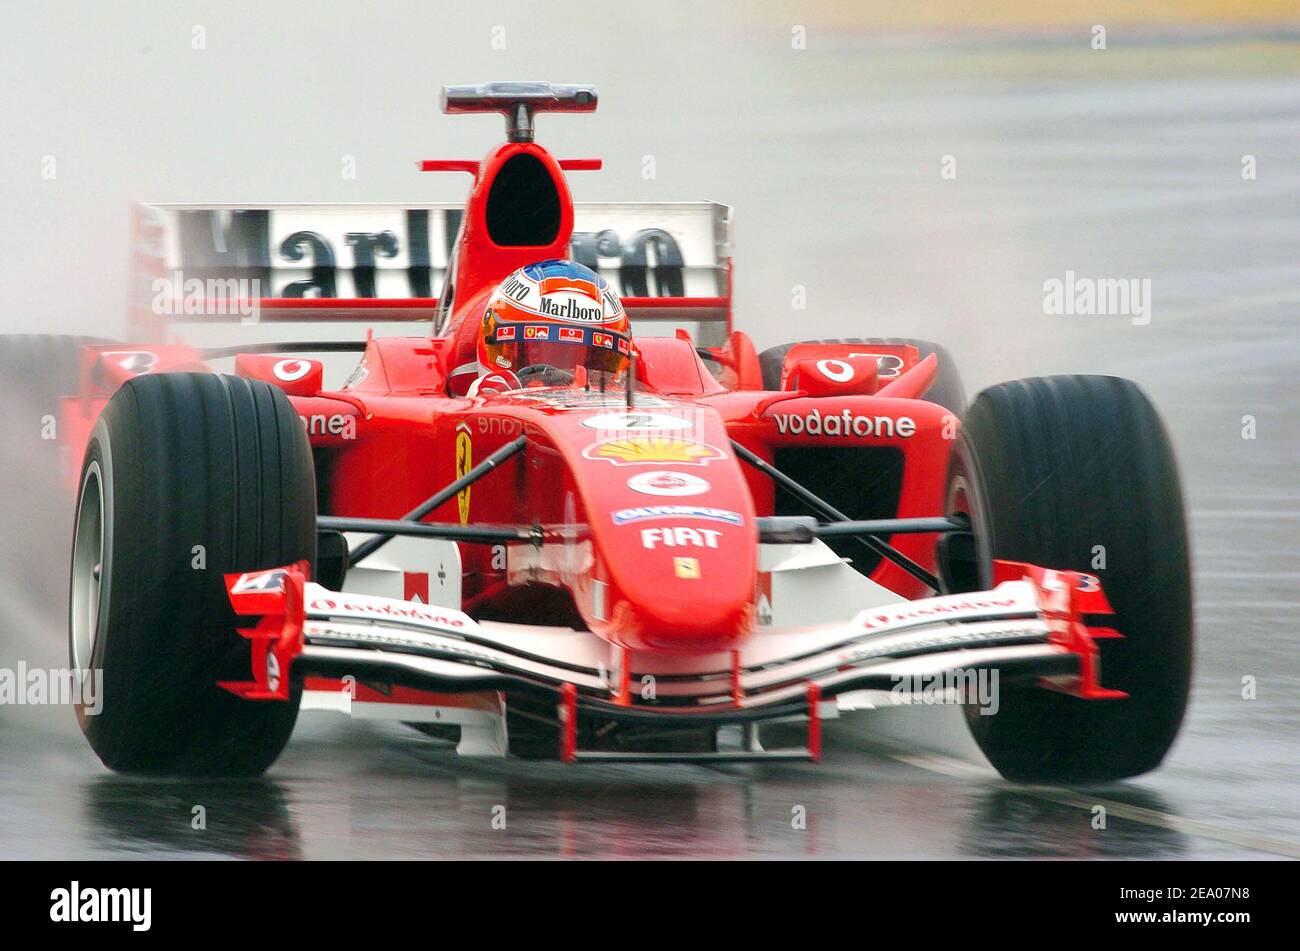 Brazilian Formula 1 driver Rubens Barrichello (team Ferrari) during the  practice at the Melbourne's Formula 1 circuit, Australia, on March 05,  2005. Photo by Thierry Gromik/ABACA Stock Photo - Alamy